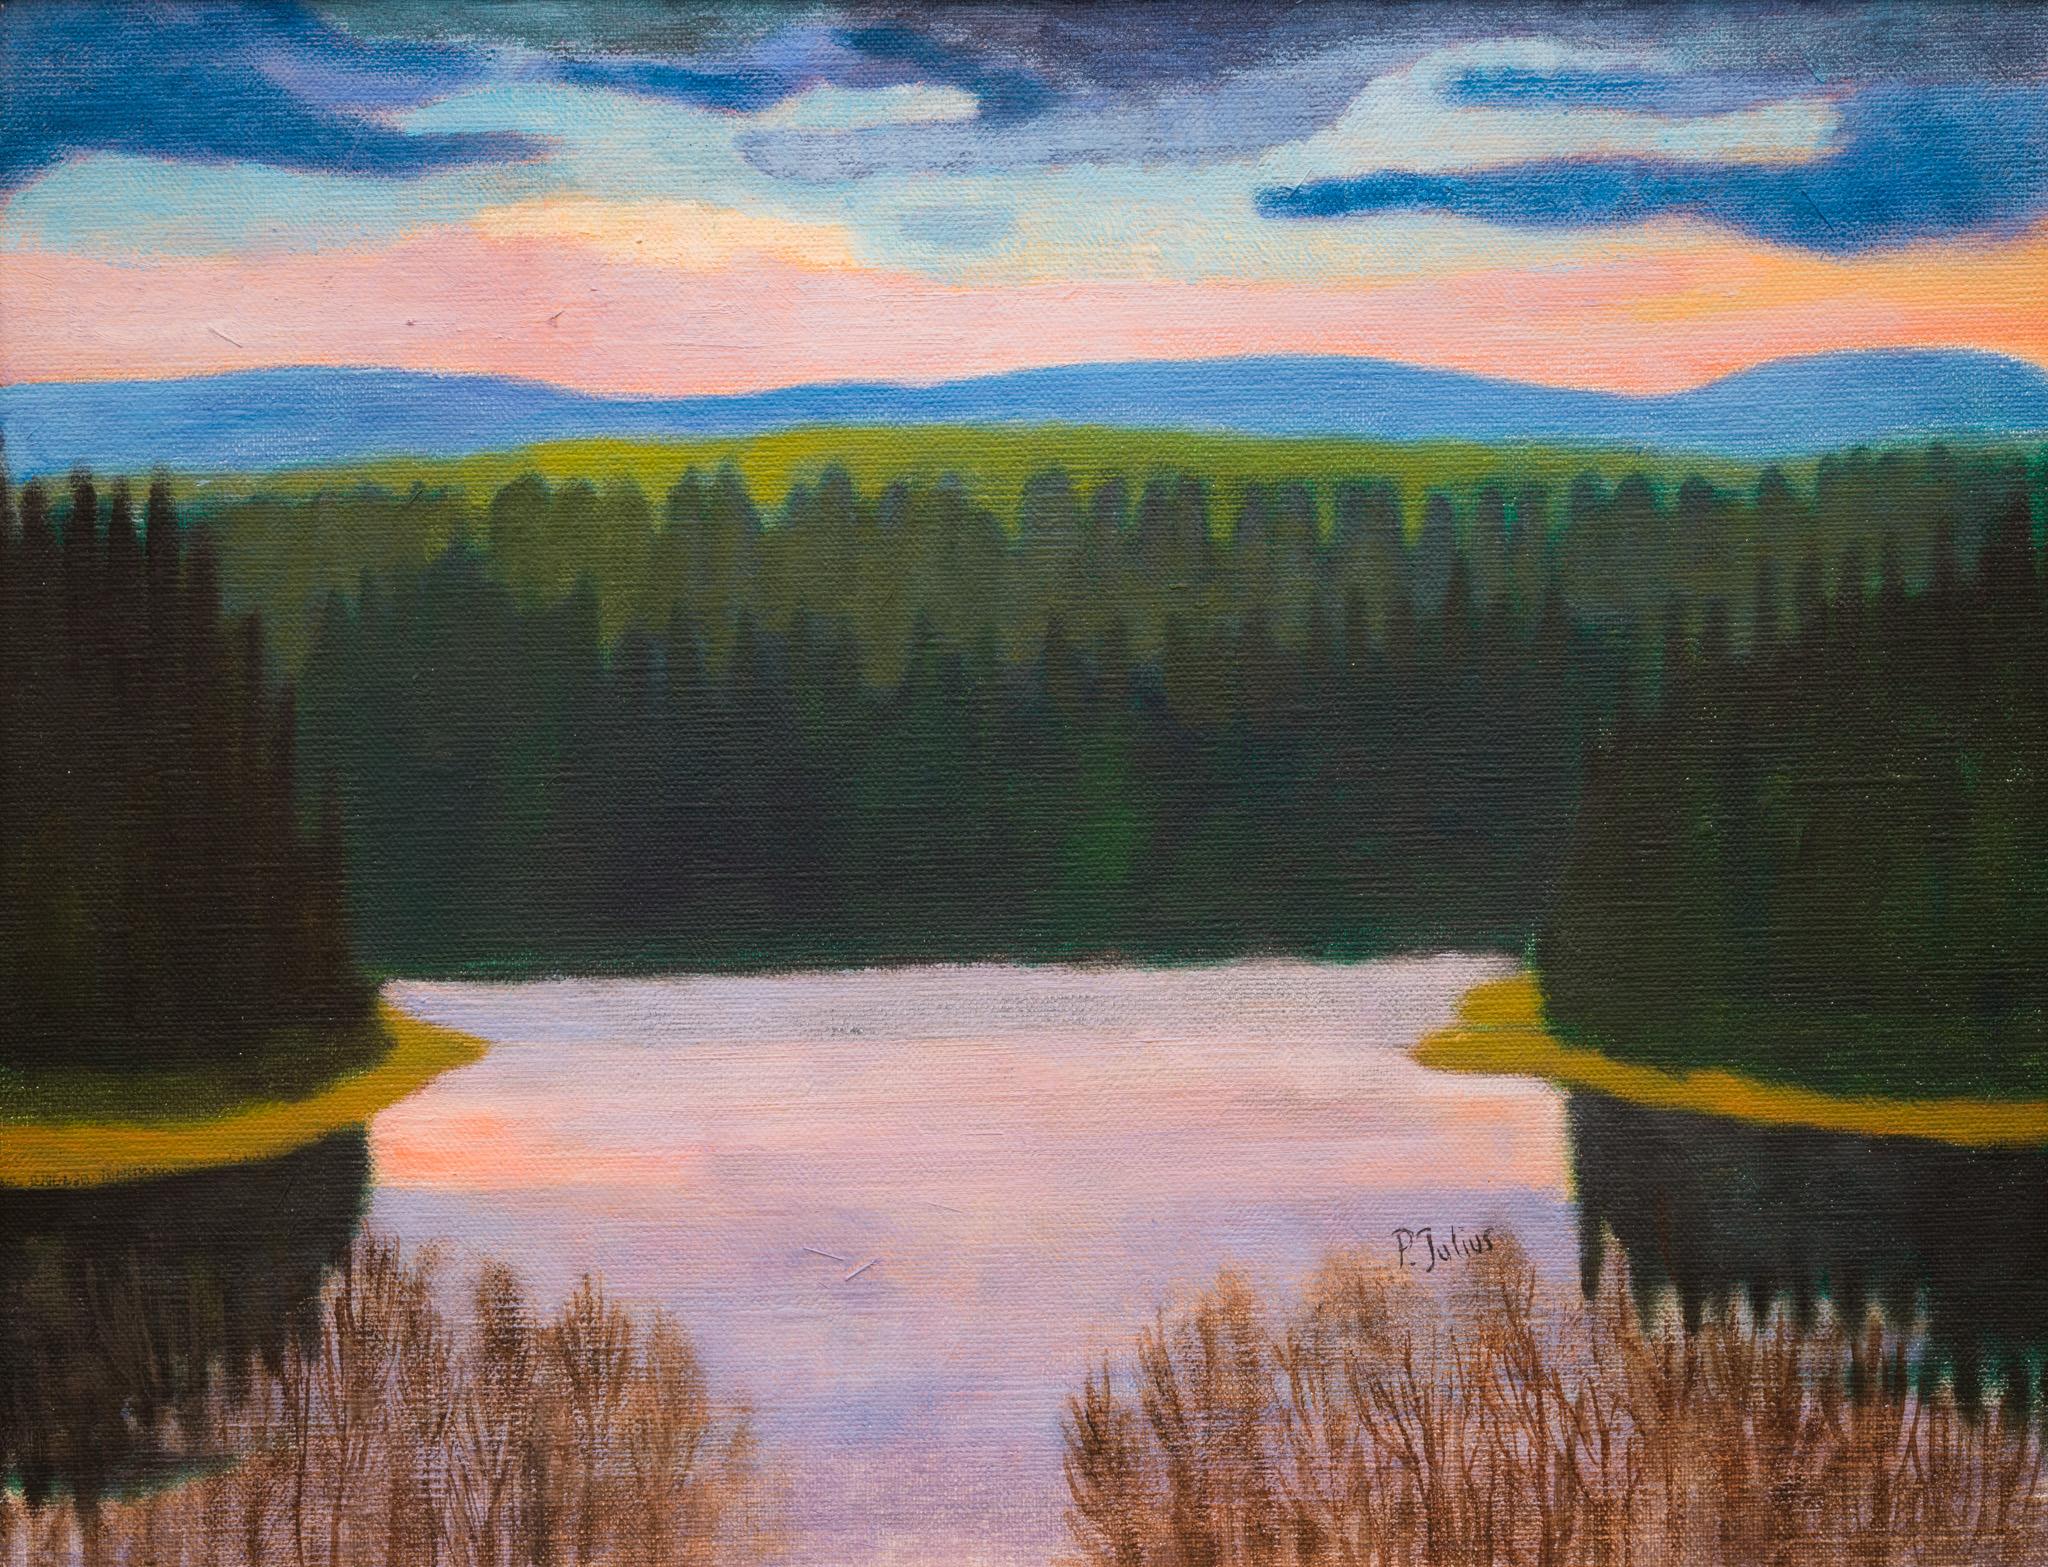 Introducing "Northern Serenity" by renowned Swedish artist Per Julius (born 1951). This captivating painting captures a serene landscape from the northern regions of Sweden. The artwork portrays a luminous sky, blending shades of light and dark